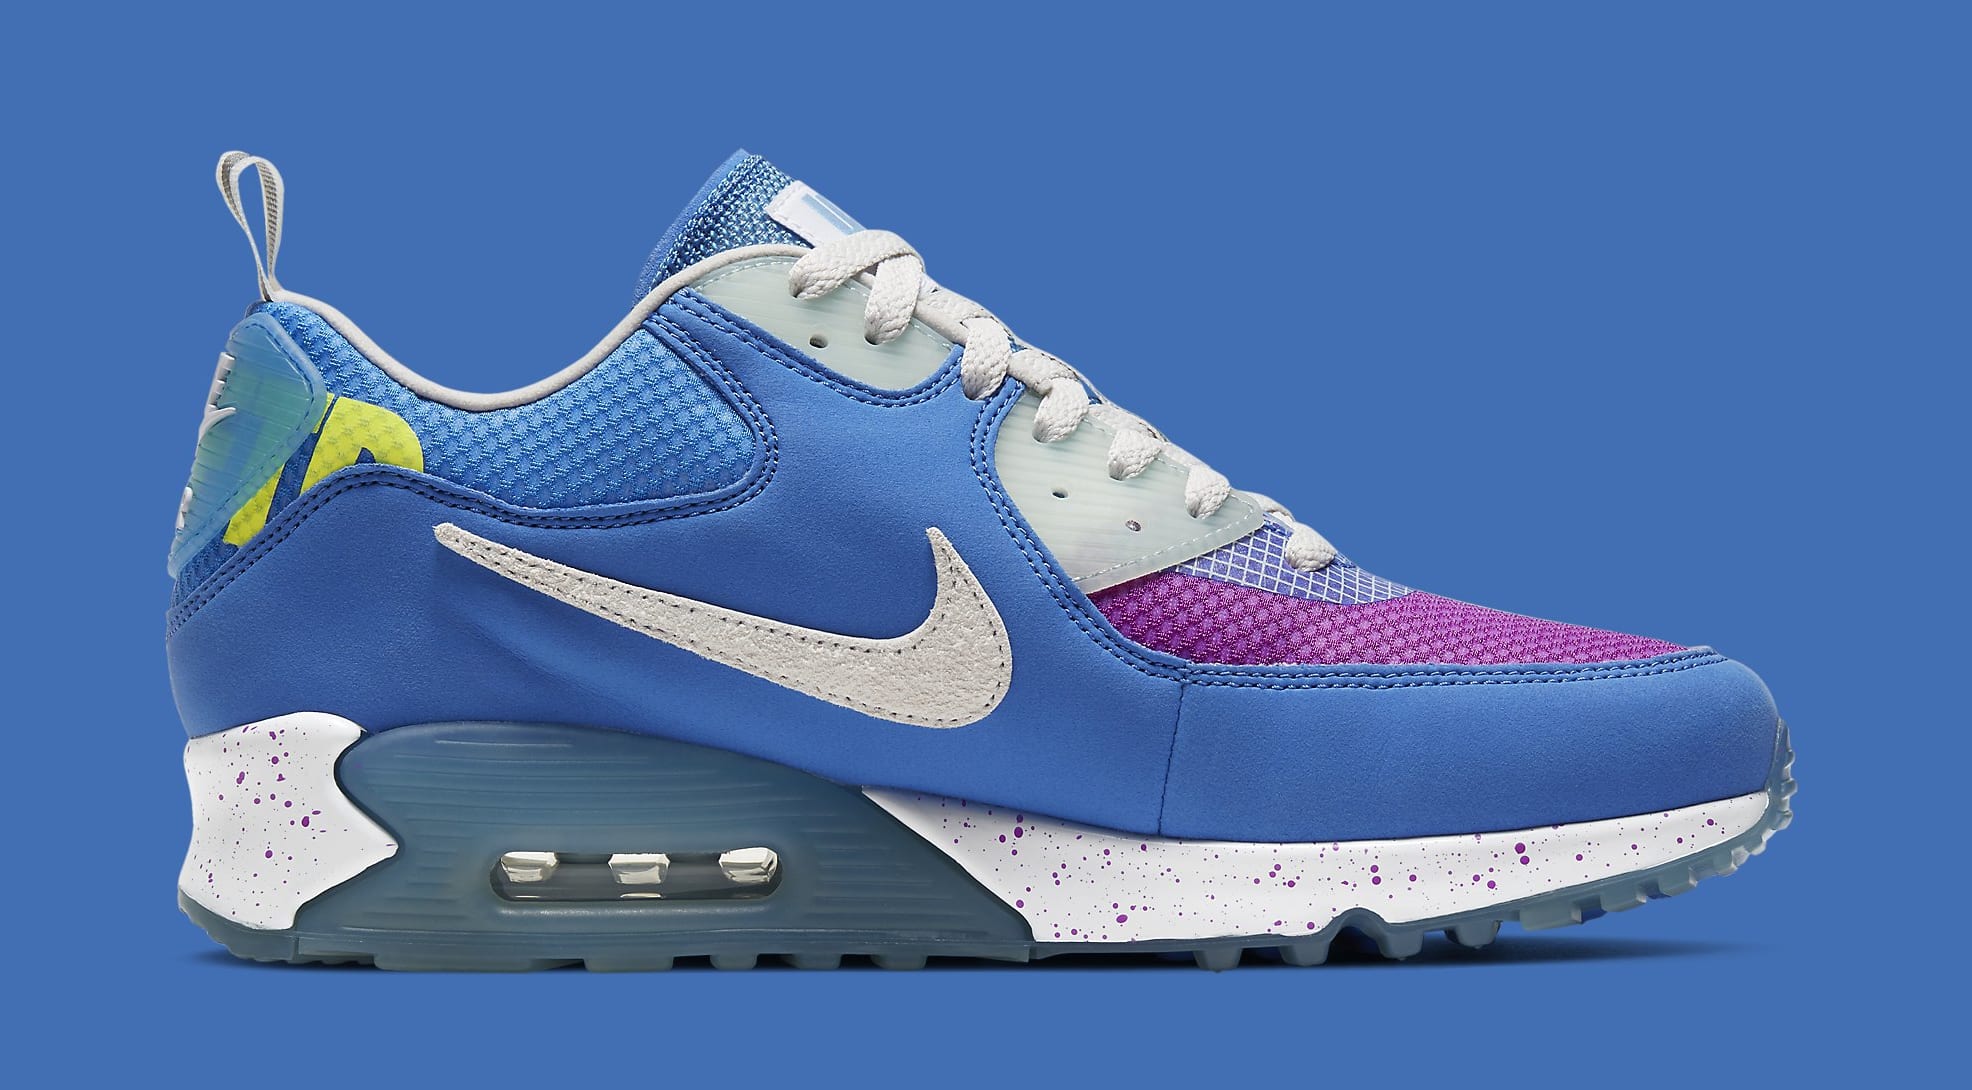 undefeated-nike-air-max-90-pacific-blue-cq2289-400-medial